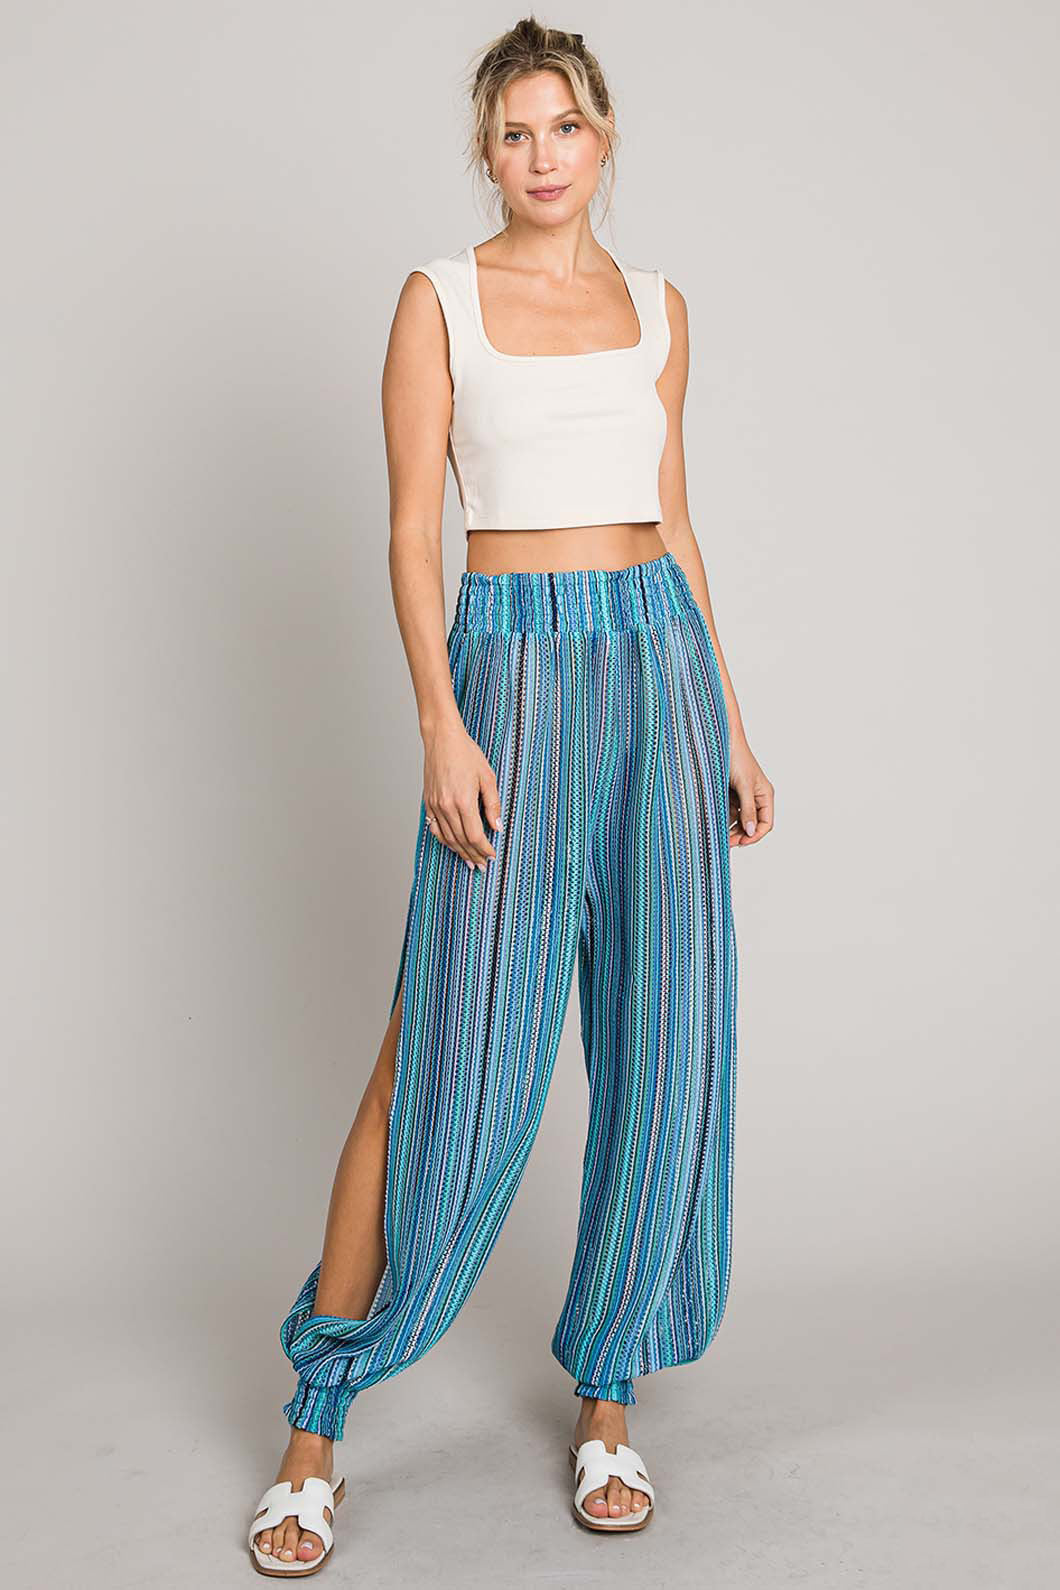 Striped Cotton Smocked Pants - Lightweight Beach Cover Up by Cotton Bleu, Perfect for Summer & Travel